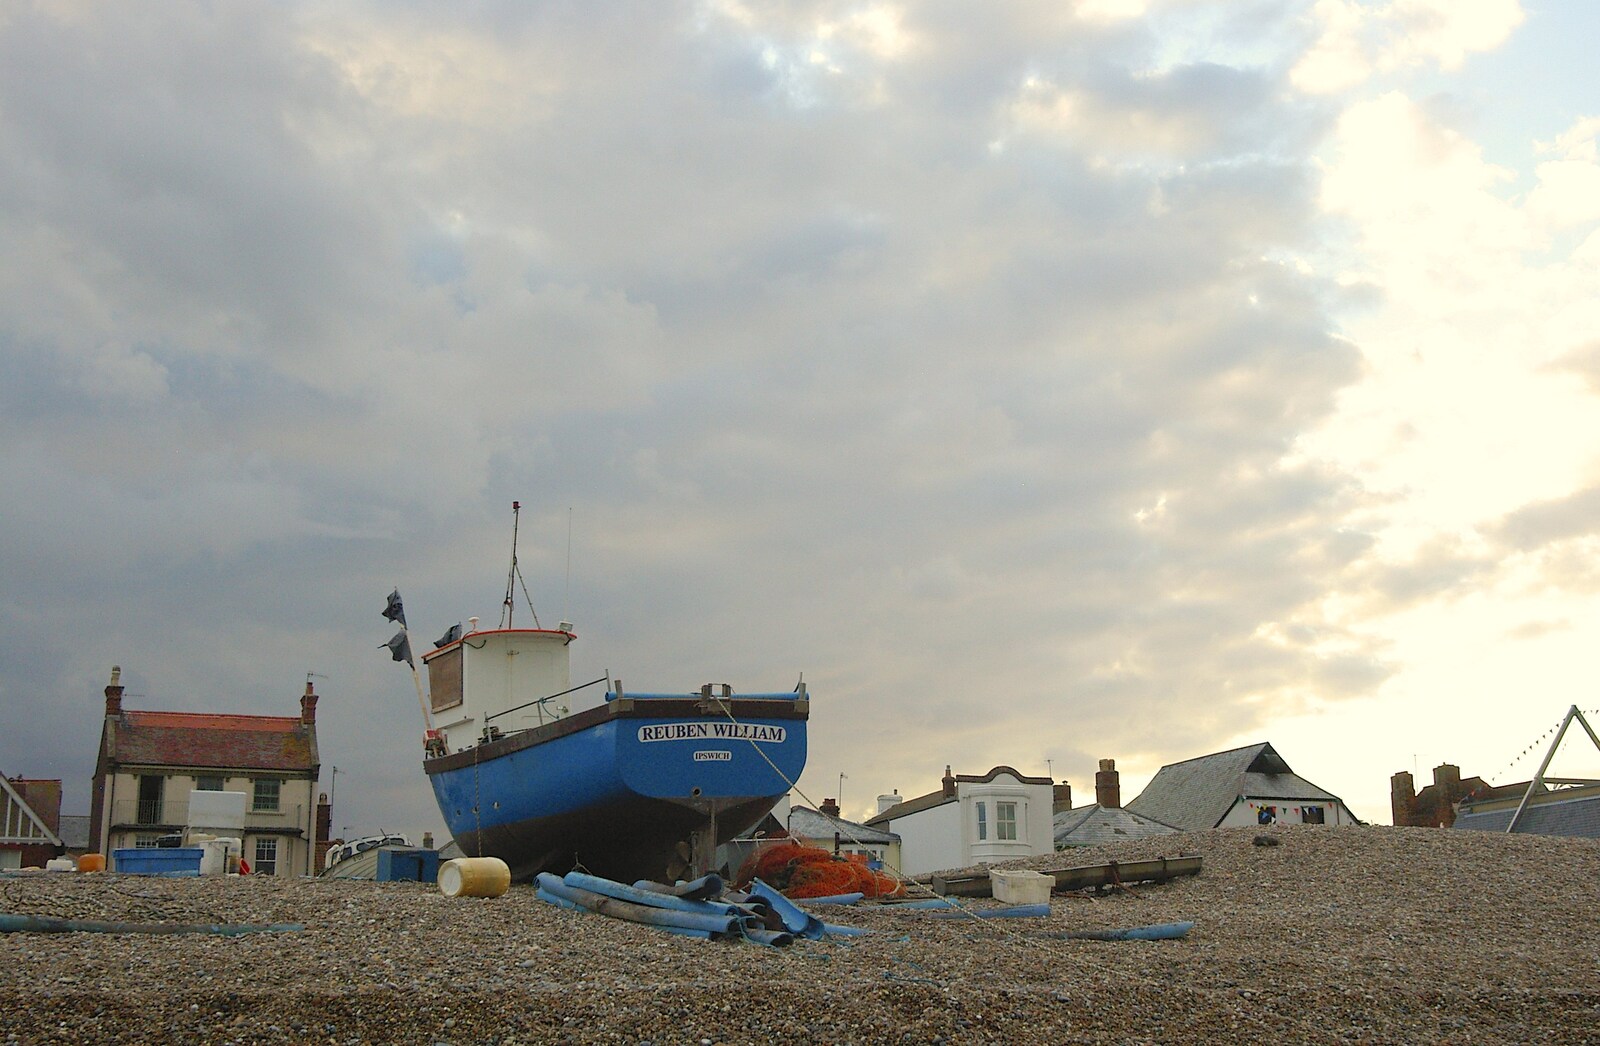 A fishing boat on the beach from The Regatta Restaurant with Mother and Mike, Aldeburgh, Suffolk - 10th August 2006